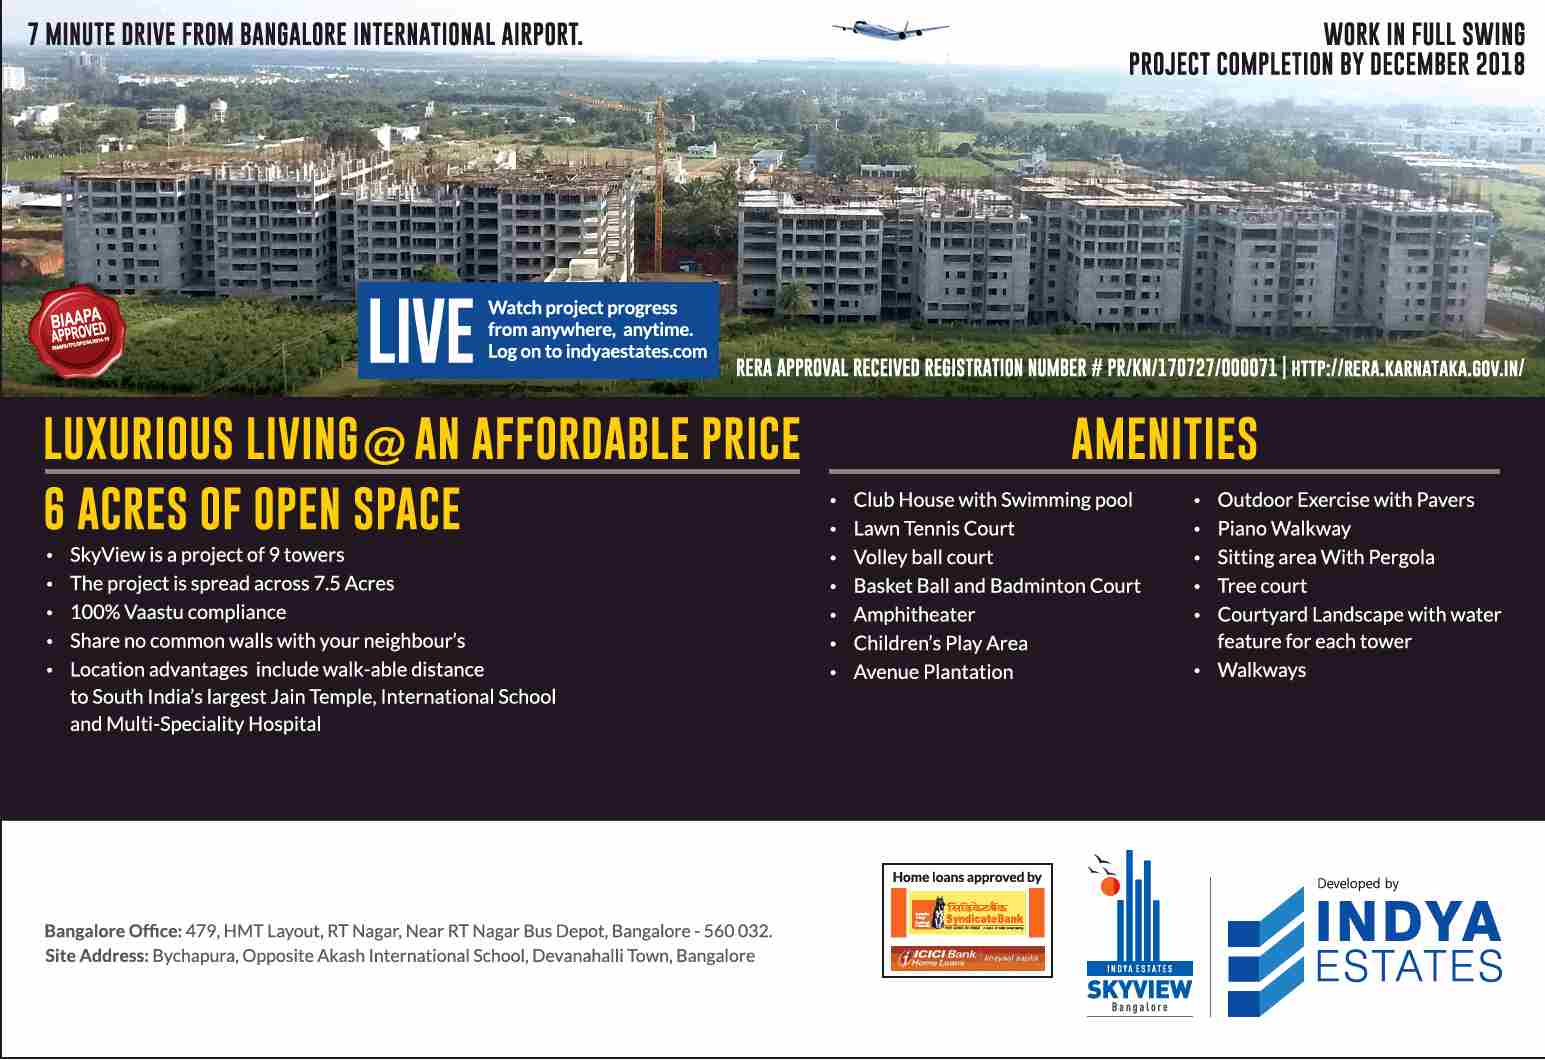 Live a luxurious living in an affordable price at Indya Skyview in Bangalore